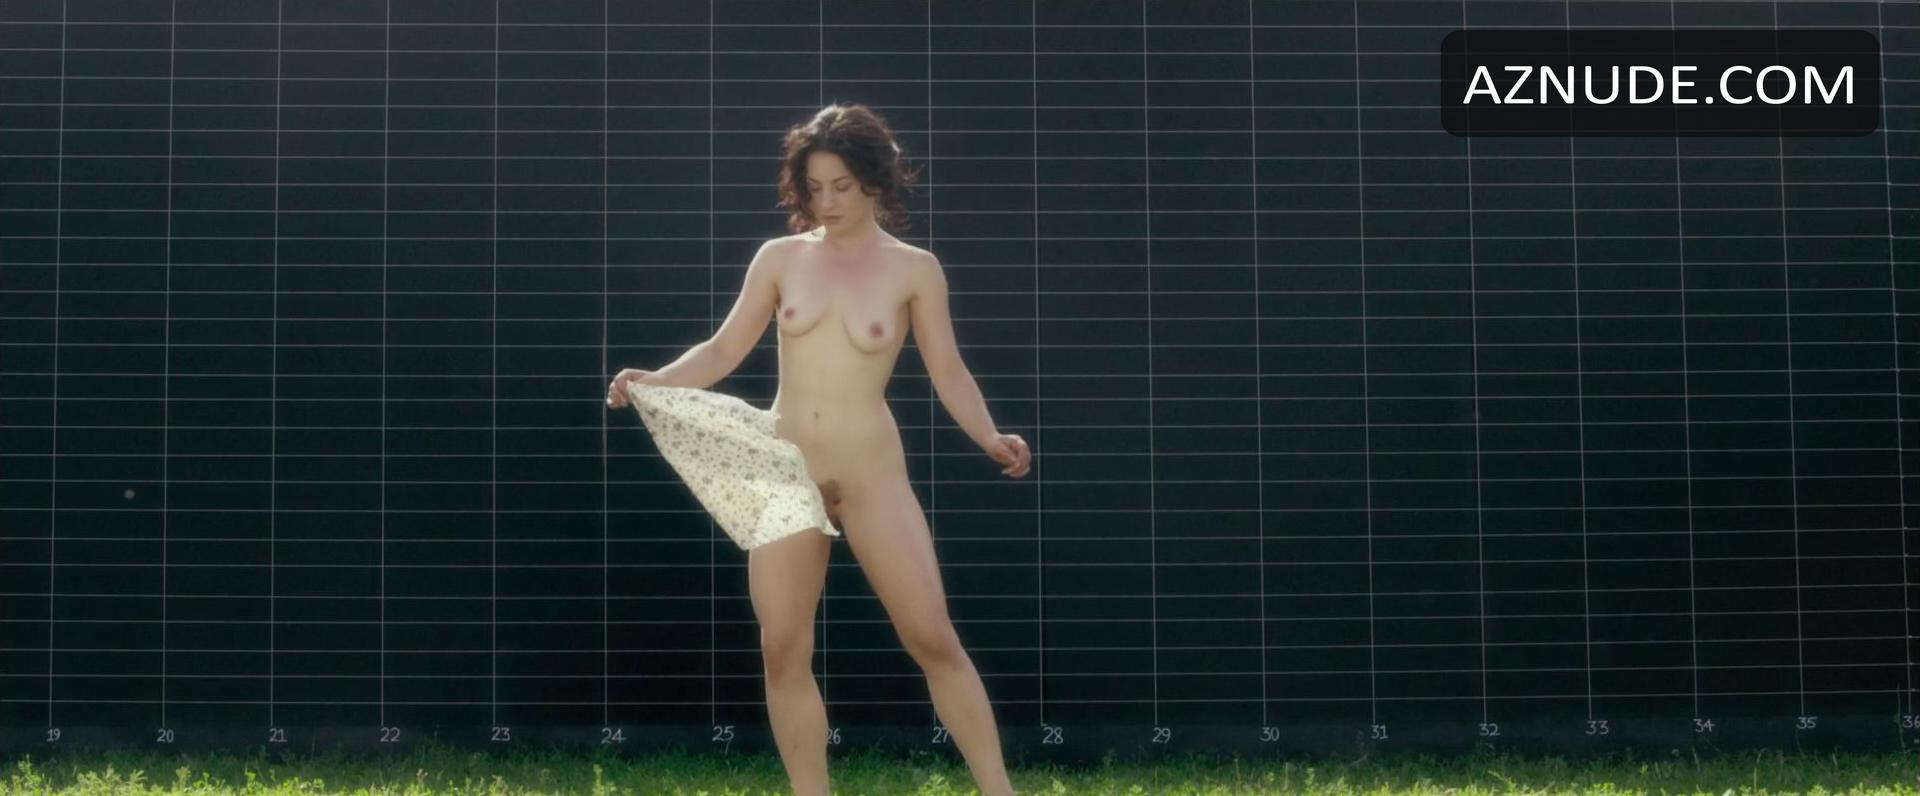 Browse Celebrity Full Frontal Images Page 122 Aznude 